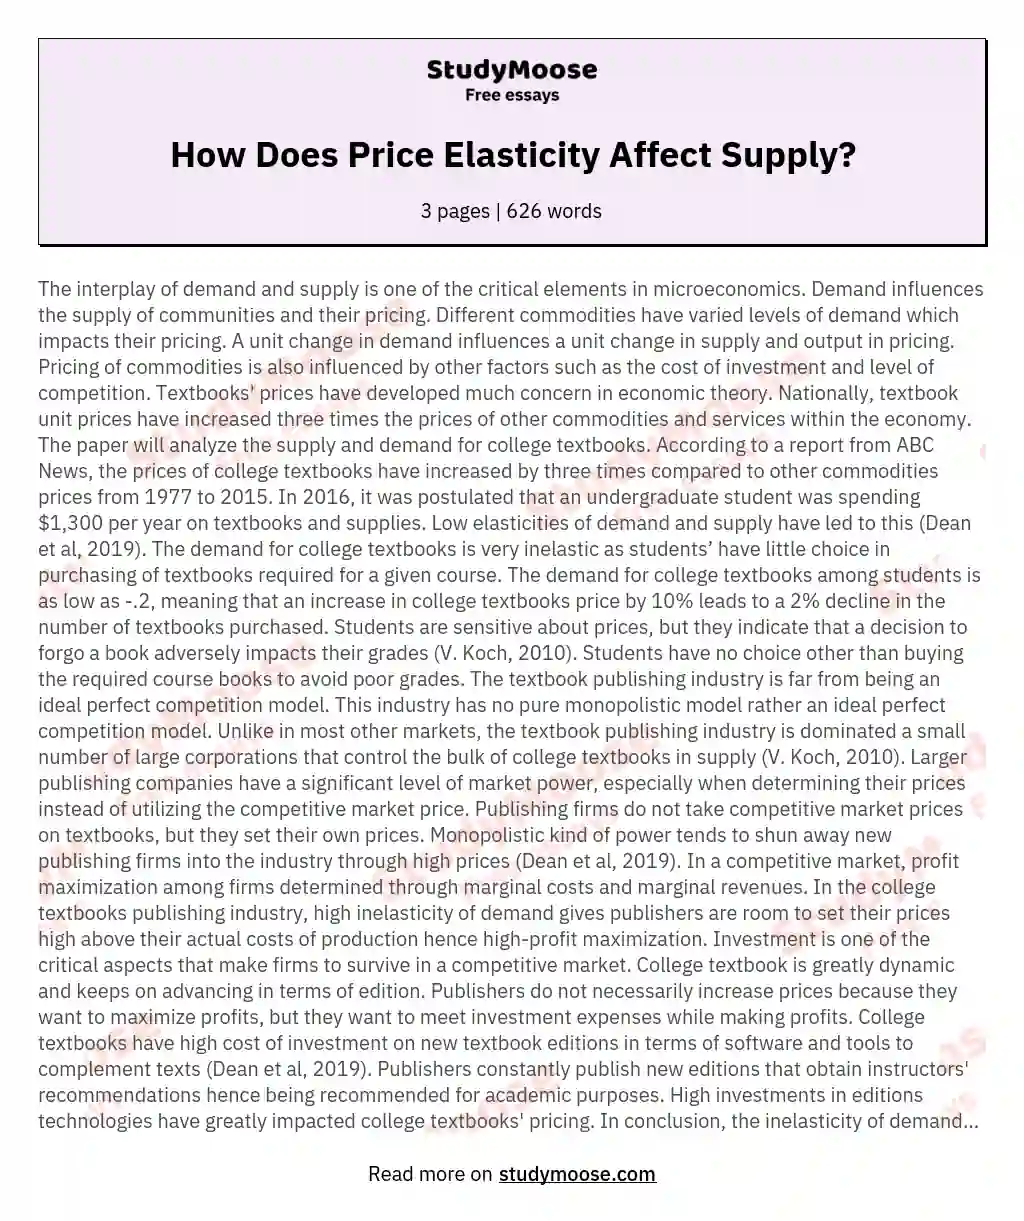 How Does Price Elasticity Affect Supply? essay